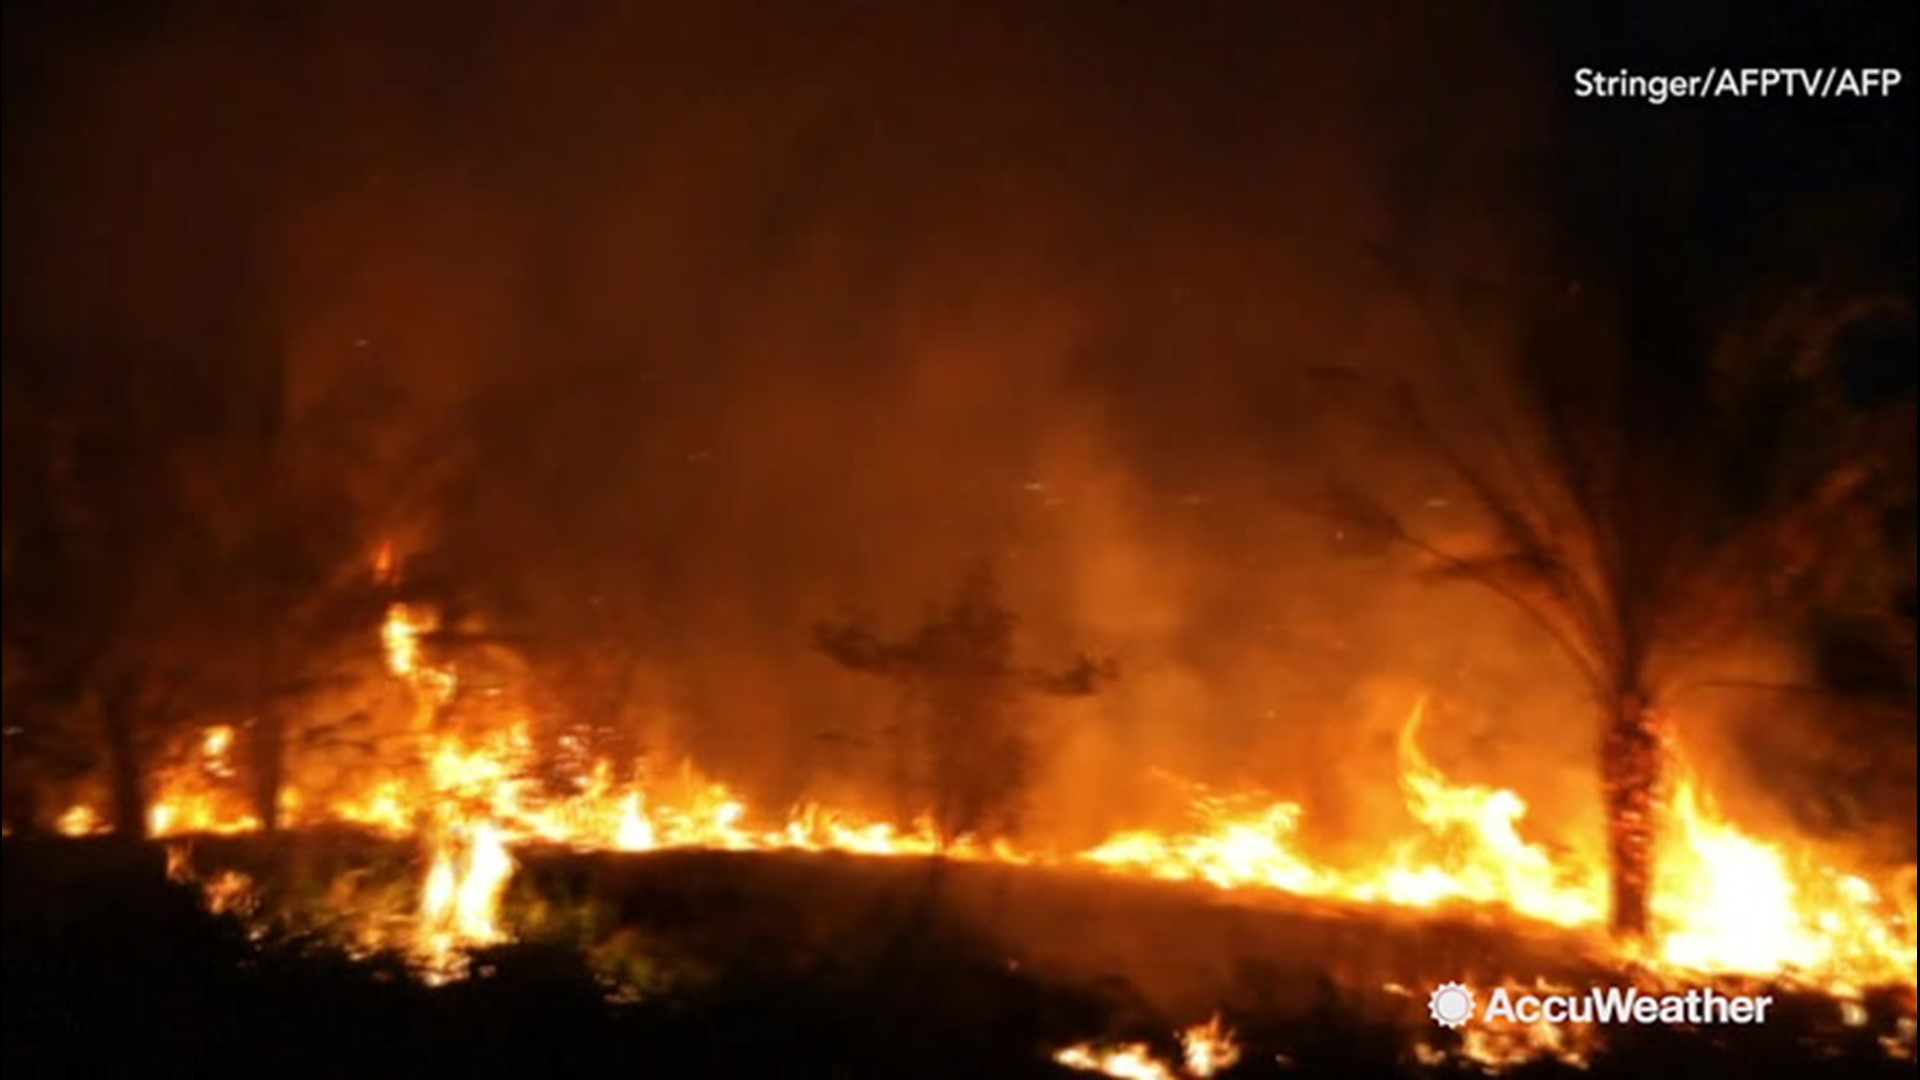 Numerous fires continue to burn the Amazon rainforest, on Aug. 25, as Brazilian troops do what they can to contain the blazes. This fire was spotted near Rio Branco, Brazil.